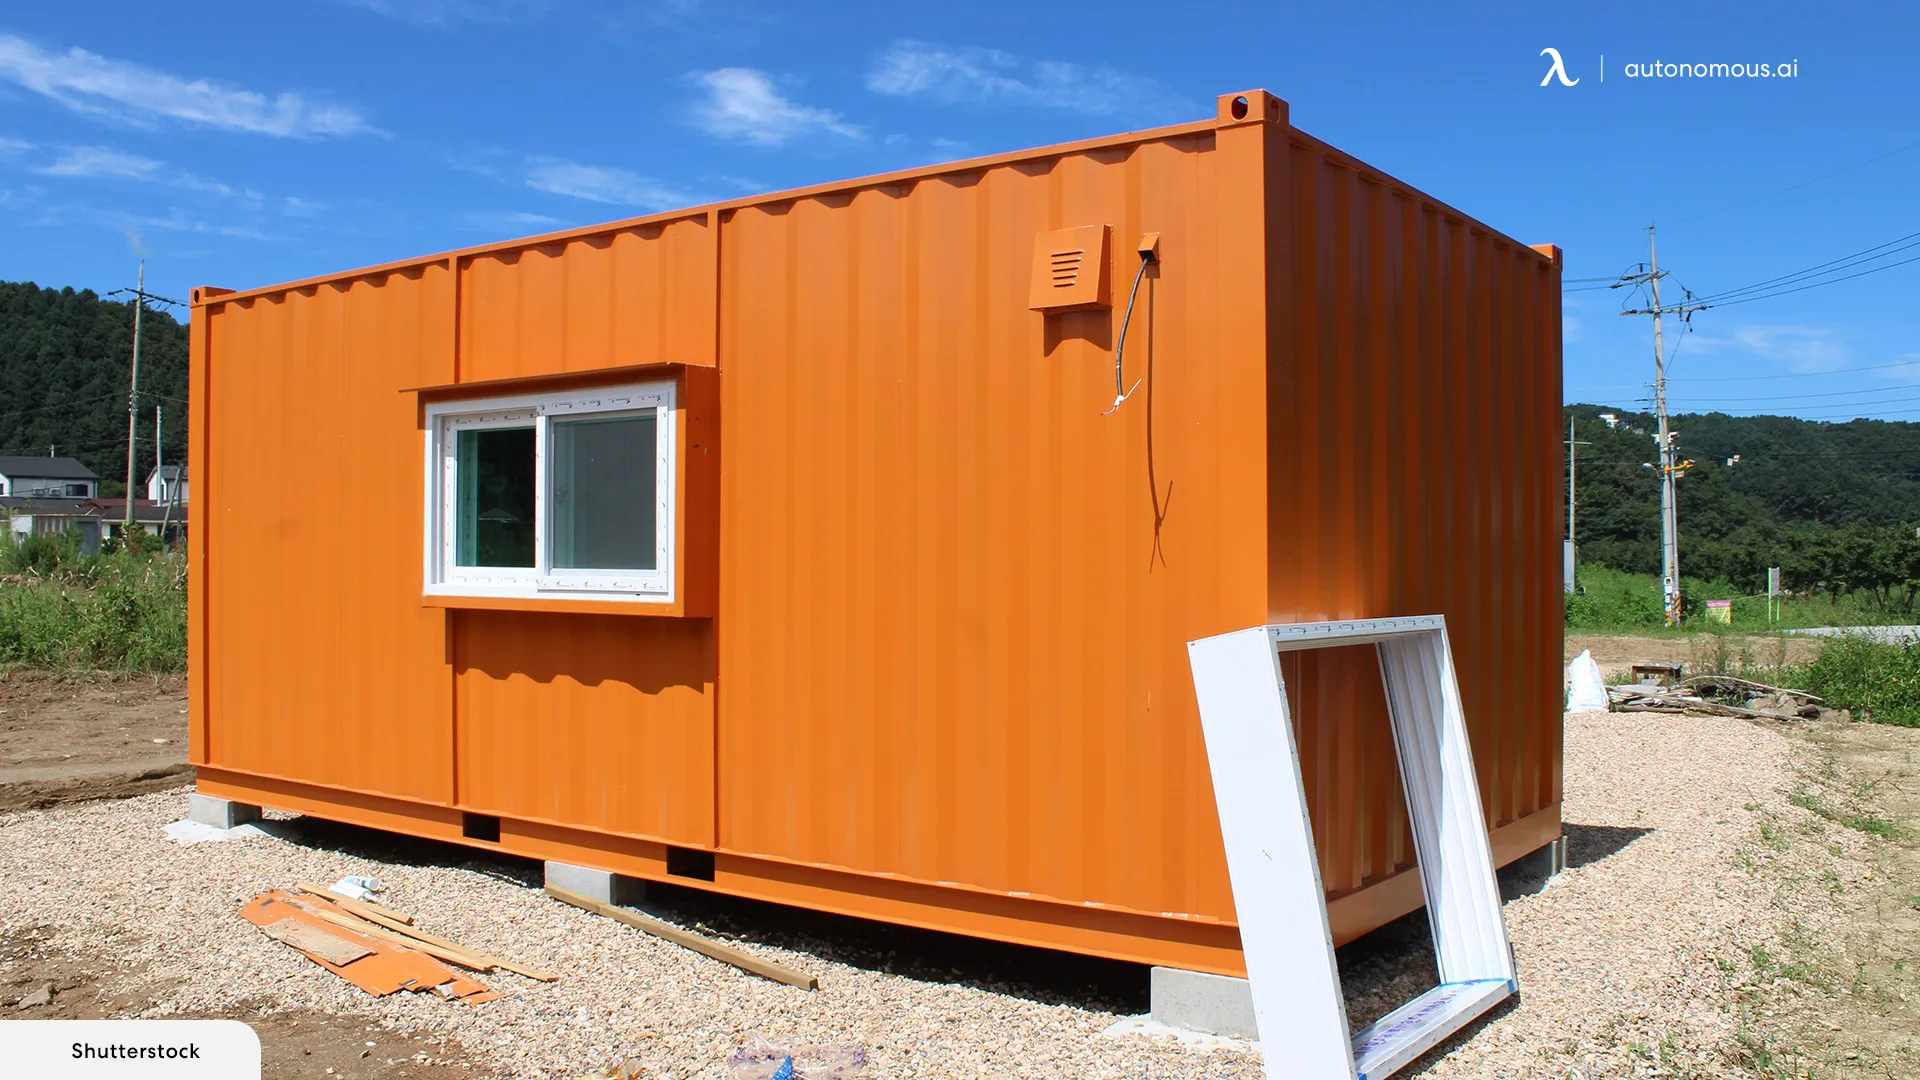 Which states legally allow shipping container homes?